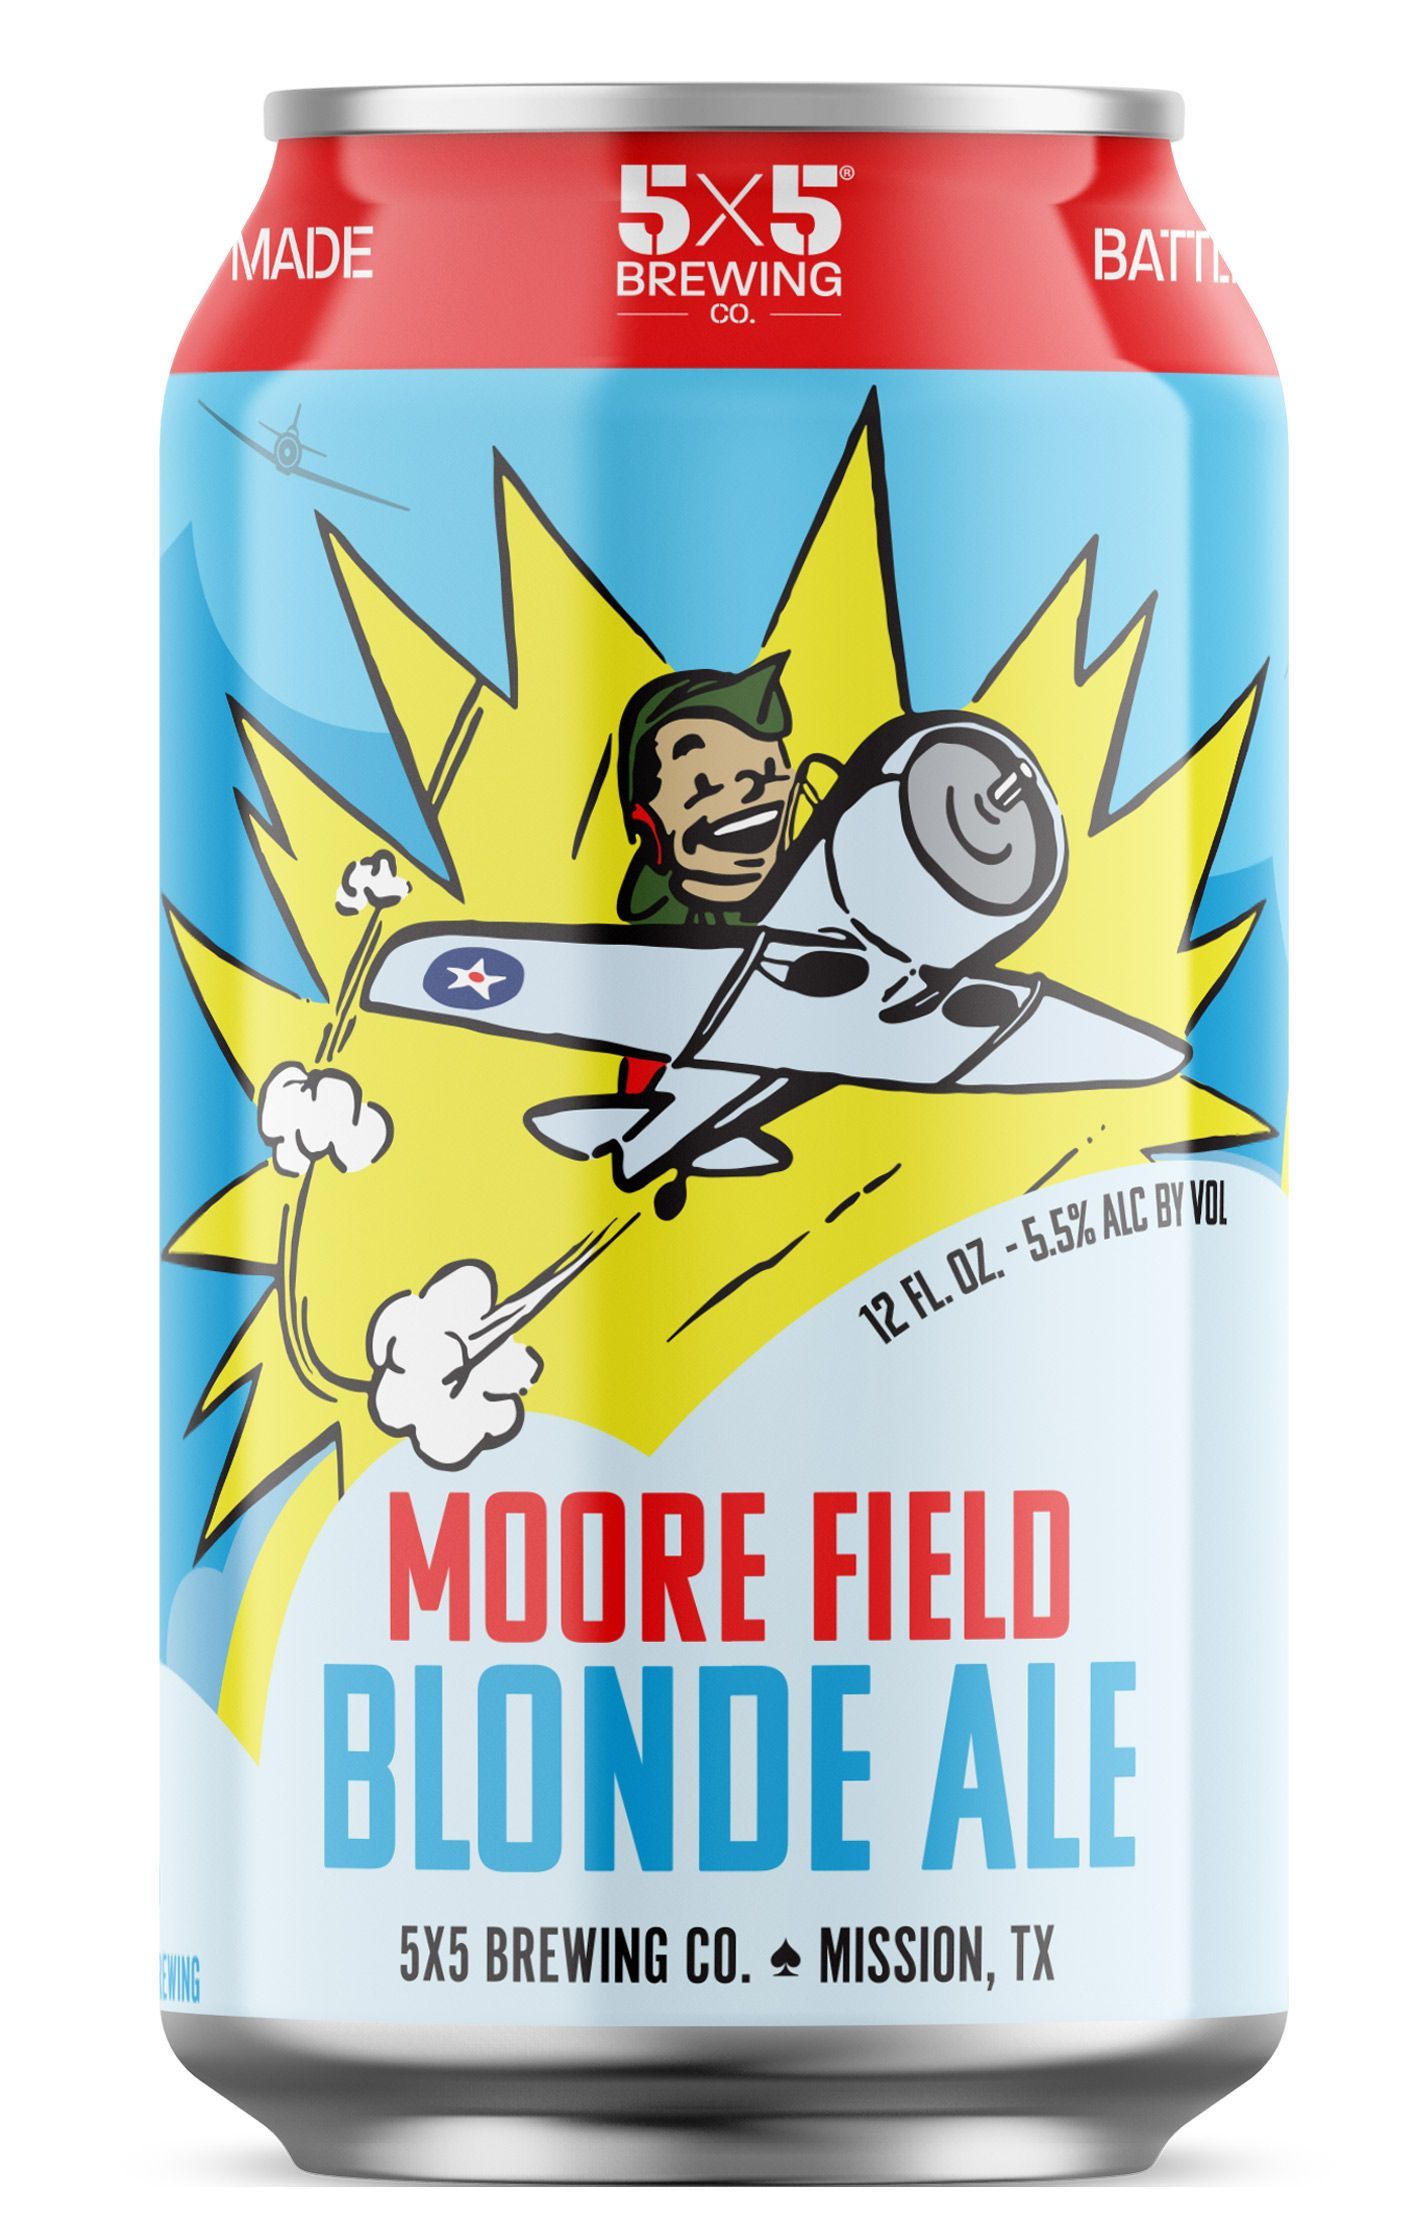 A can of moore field blonde ale from 5x5 brewing company